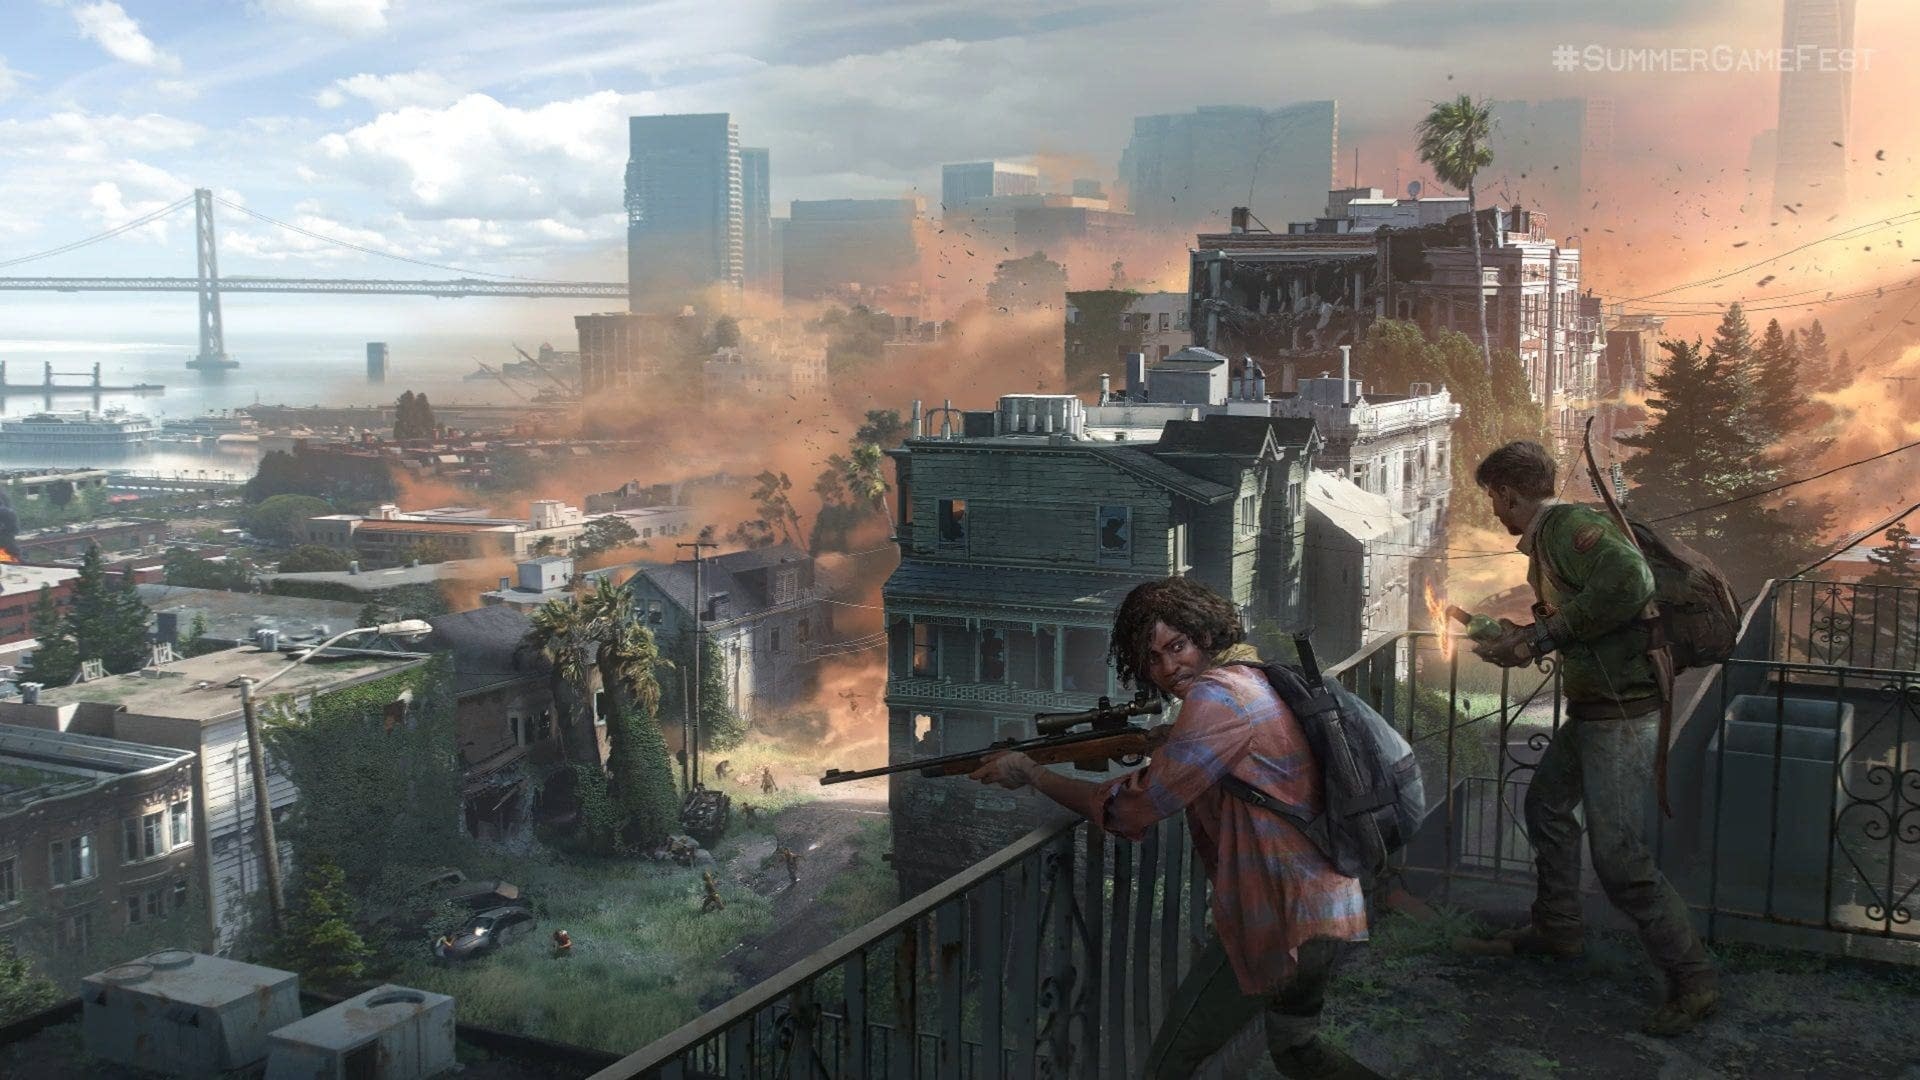 The Last of Us seems to work for its multiplayer project!